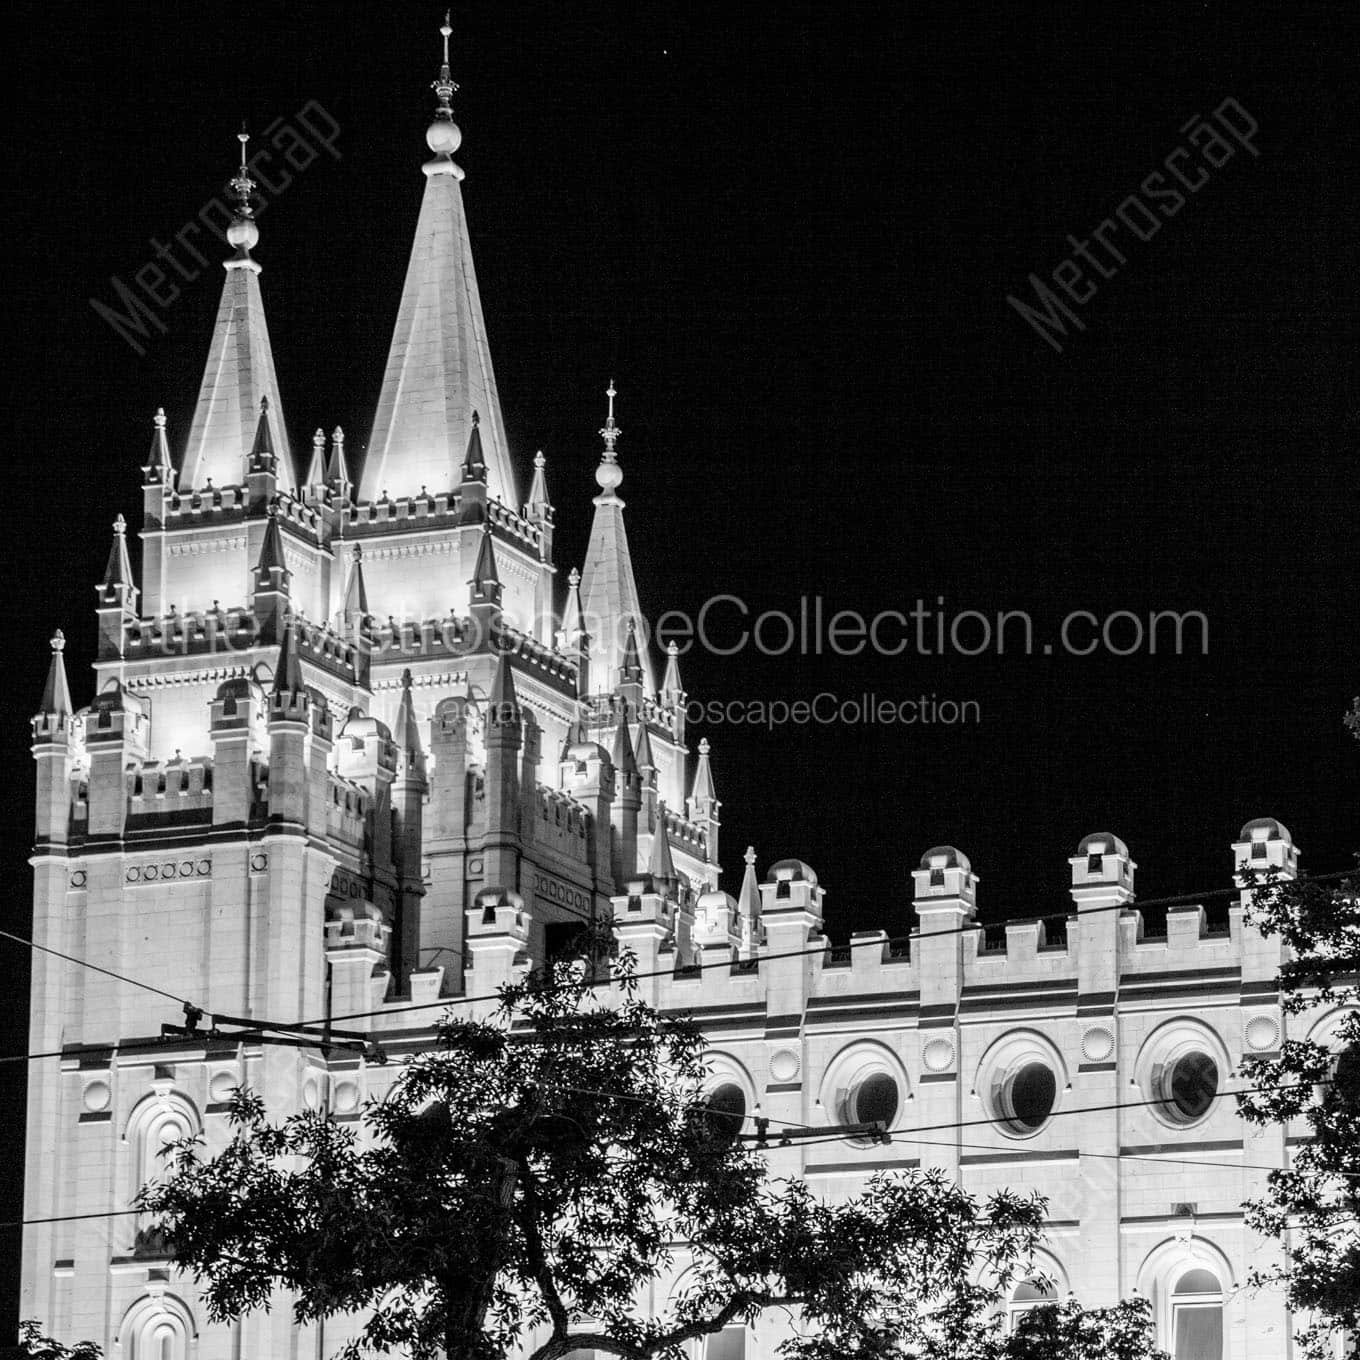 lds temple at night Black & White Wall Art